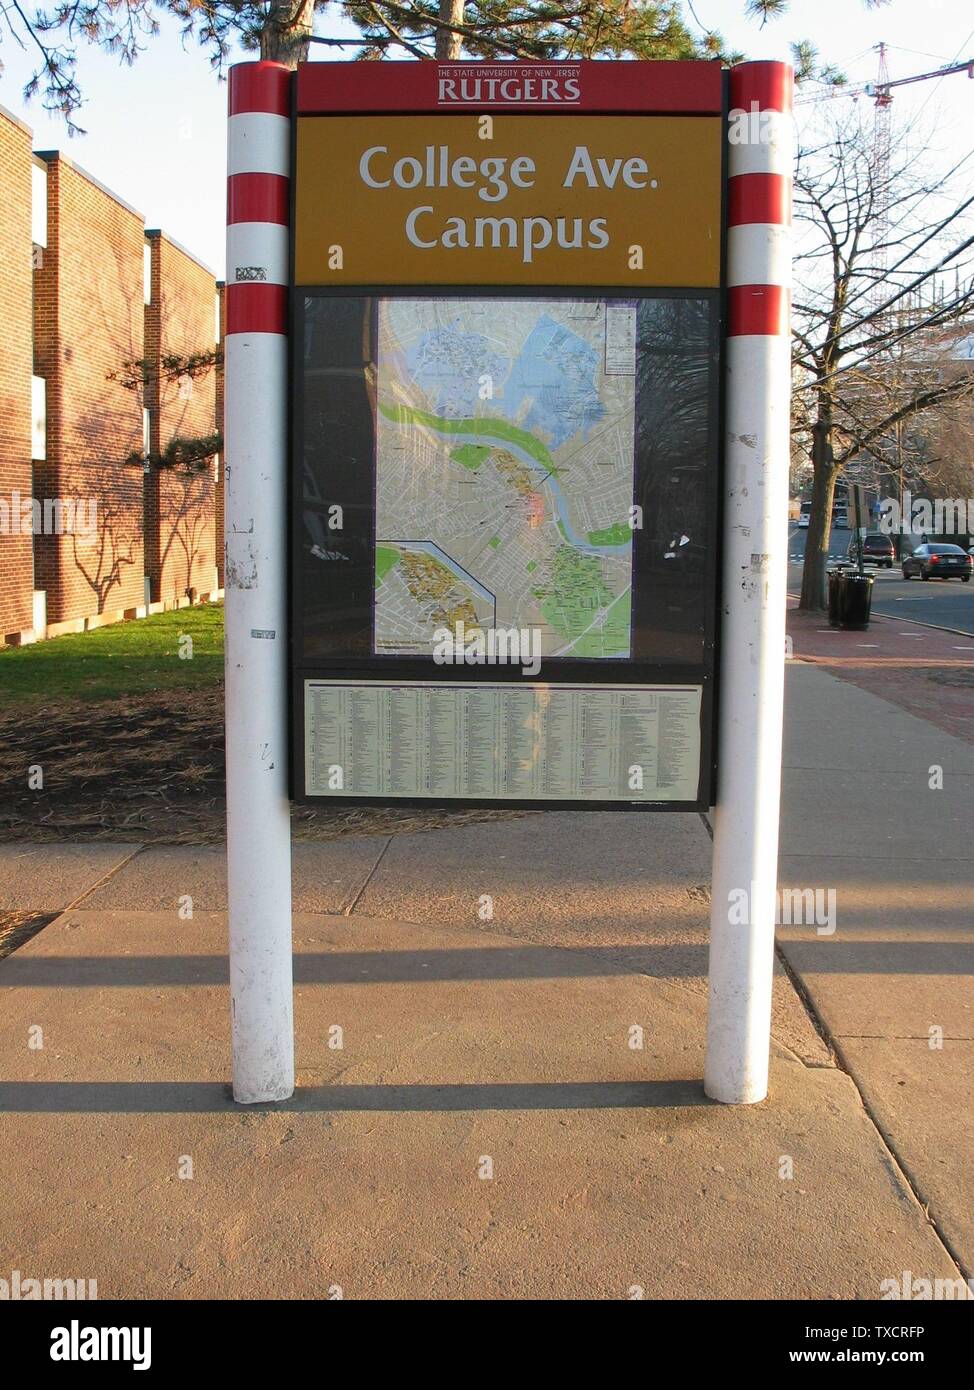 College Avenue Campus Sign And Map At Rutgers University 17